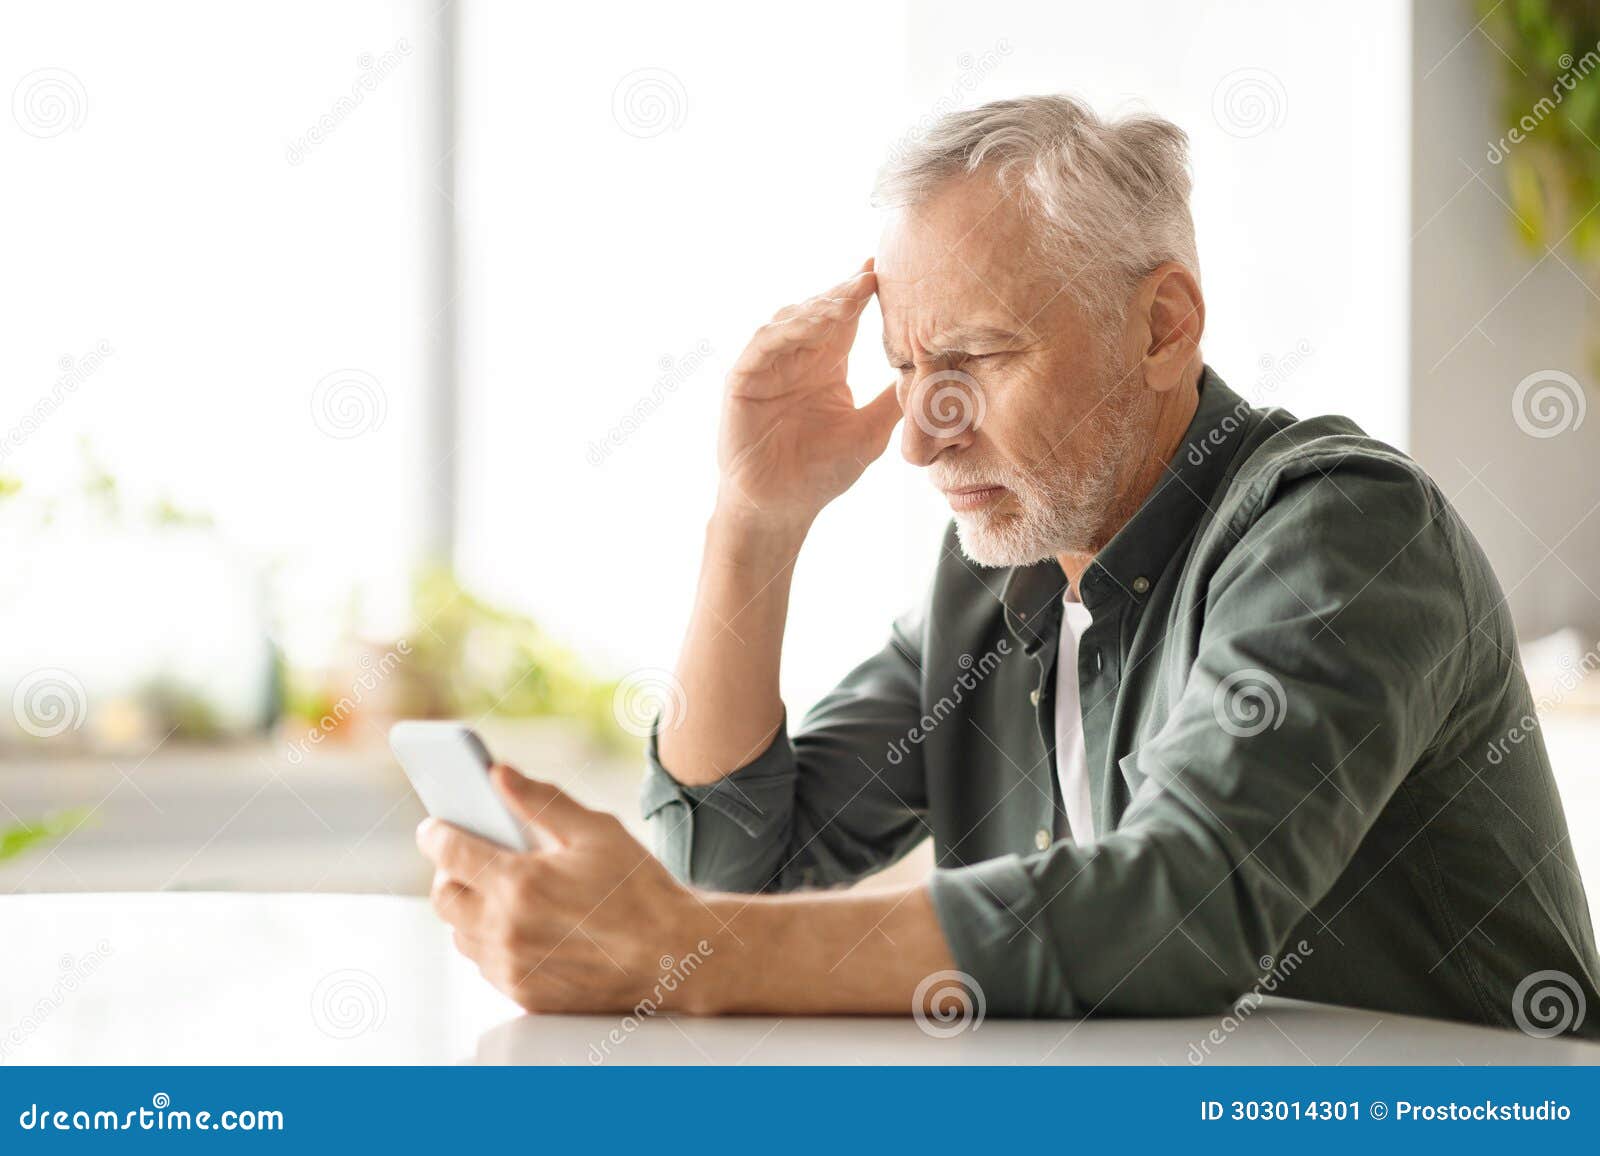 distressed elderly man suffering headache while looking at smartphone at home